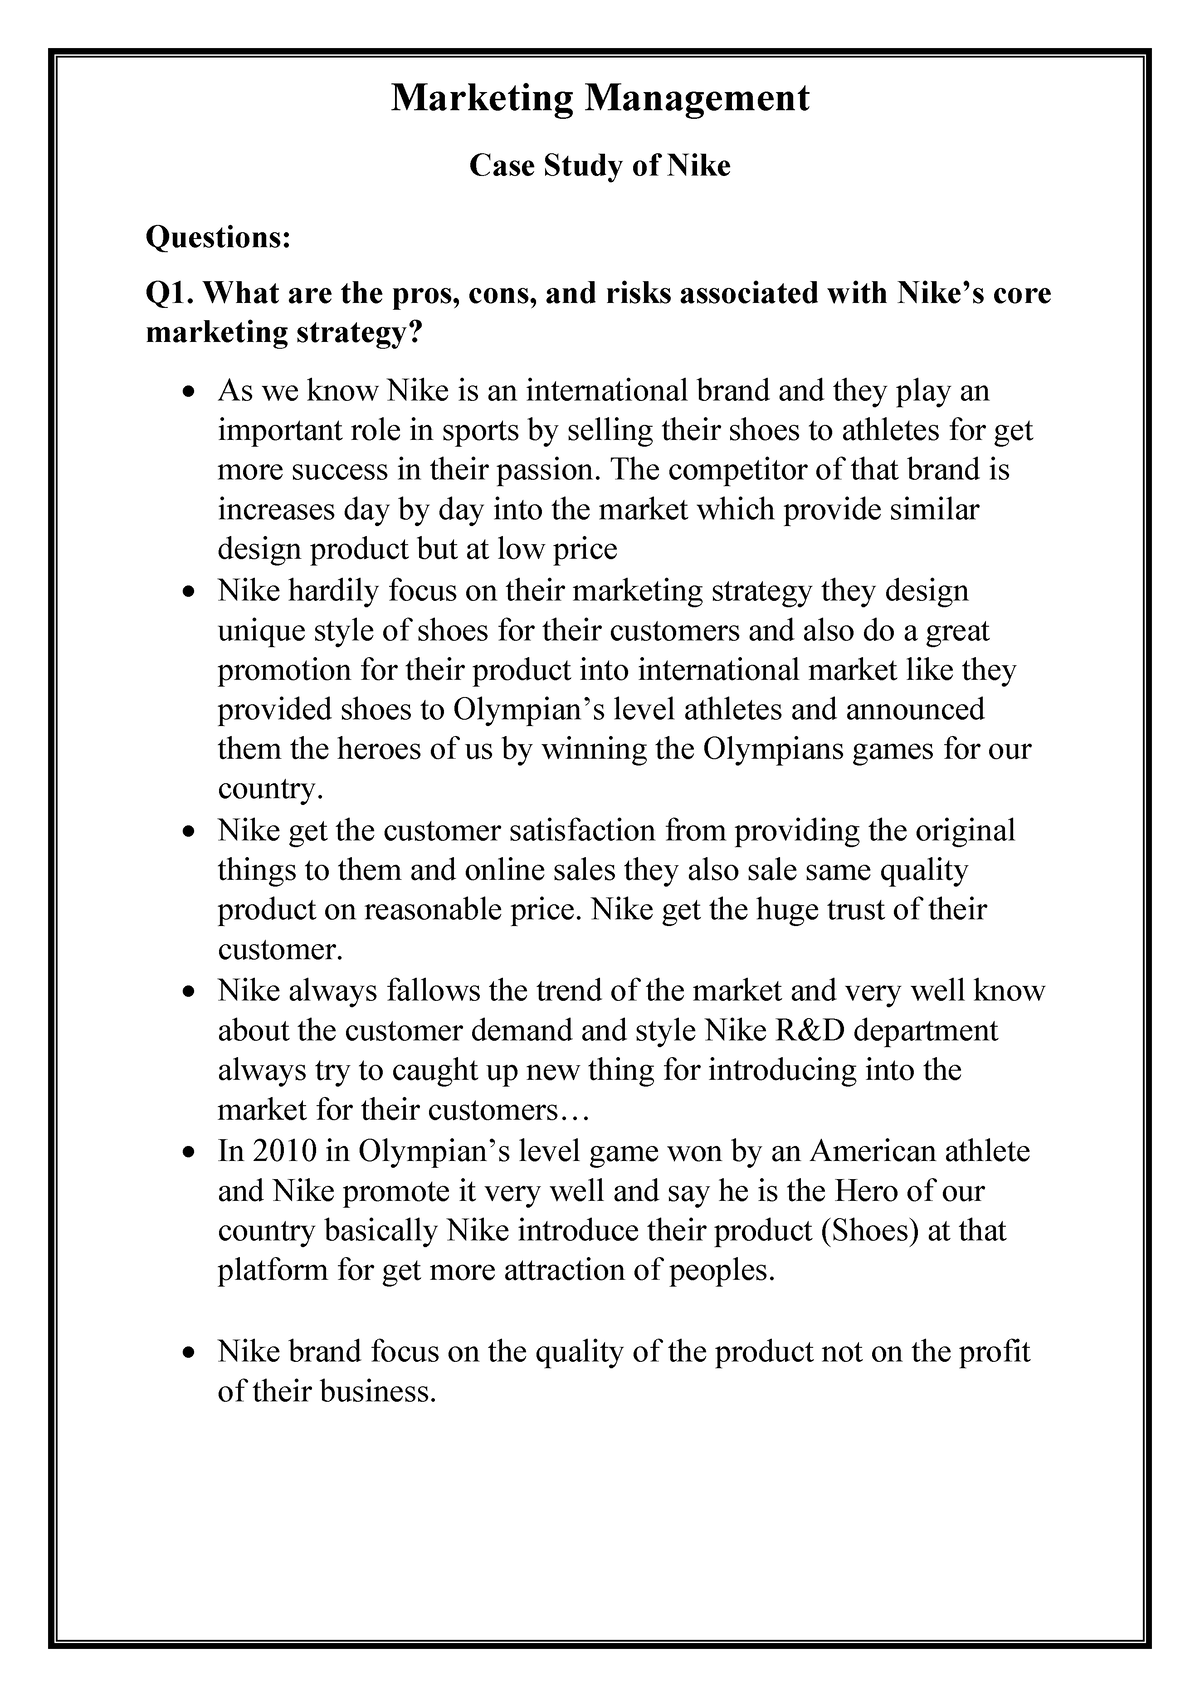 nike case study questions